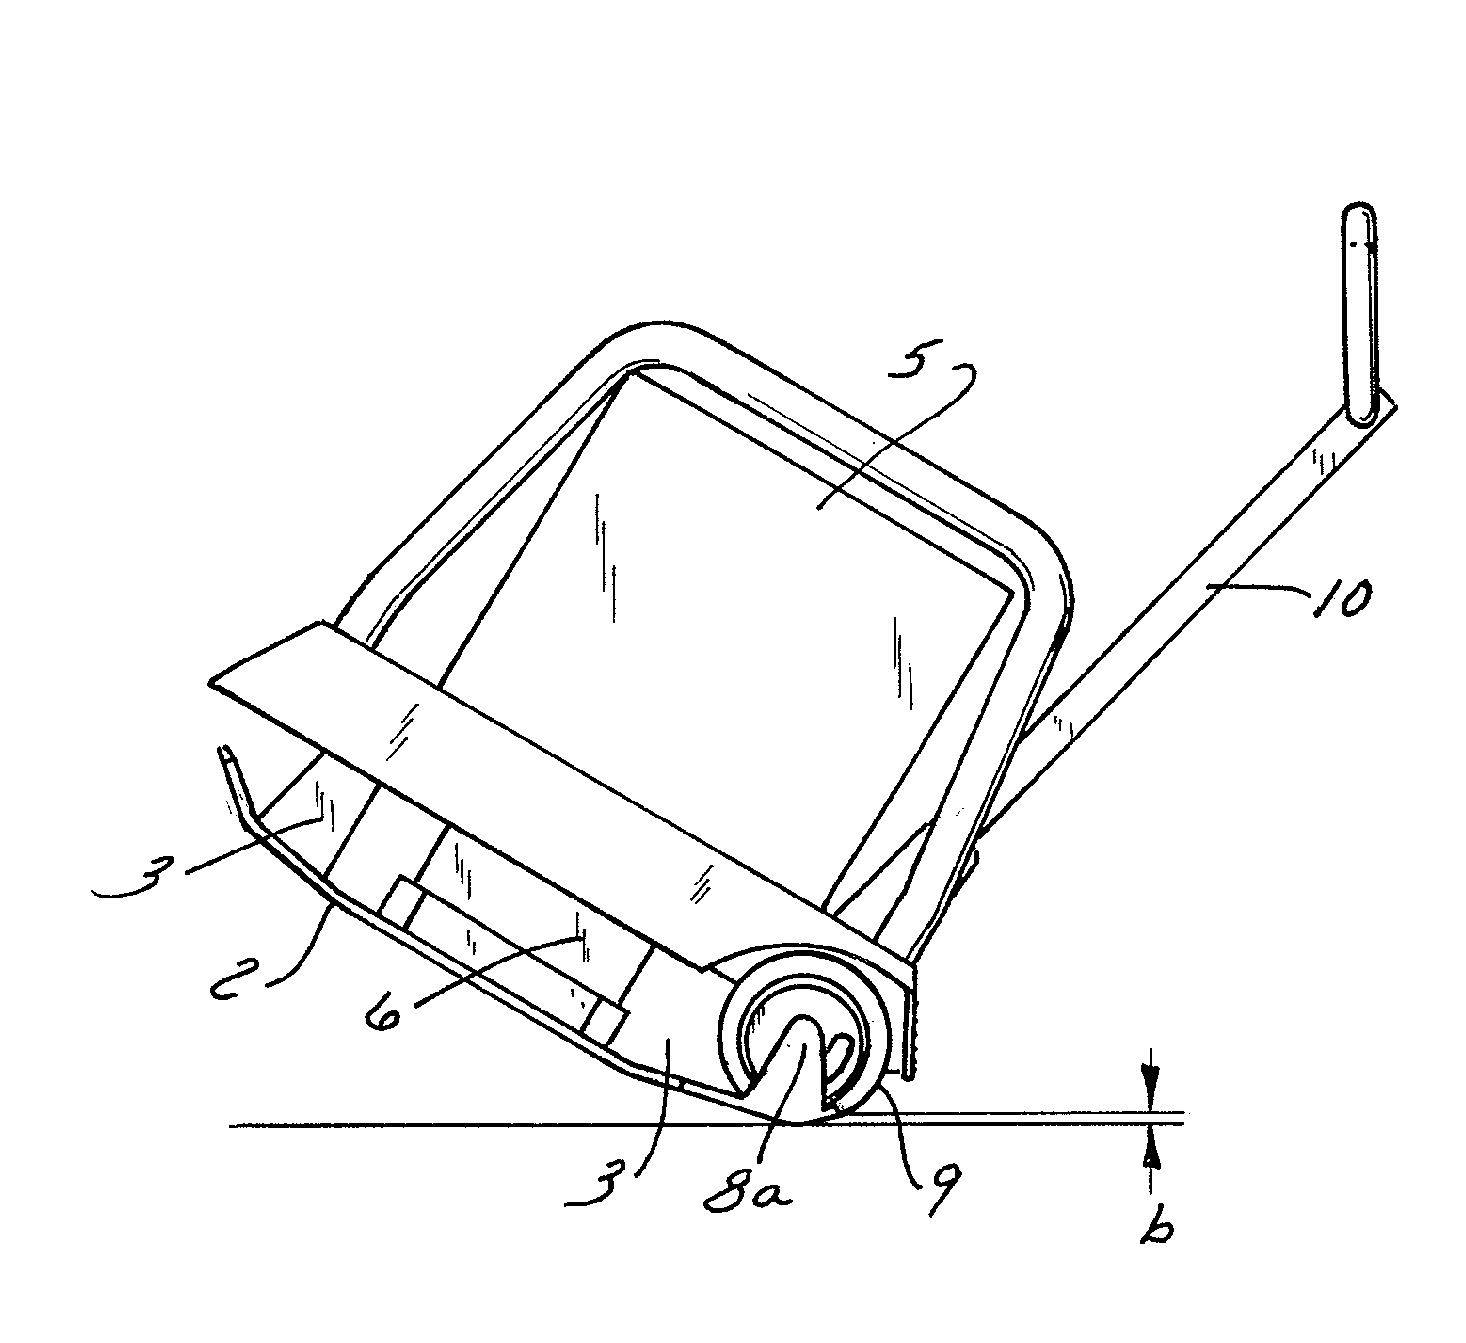 Soil compacting device comprising an undercarriage